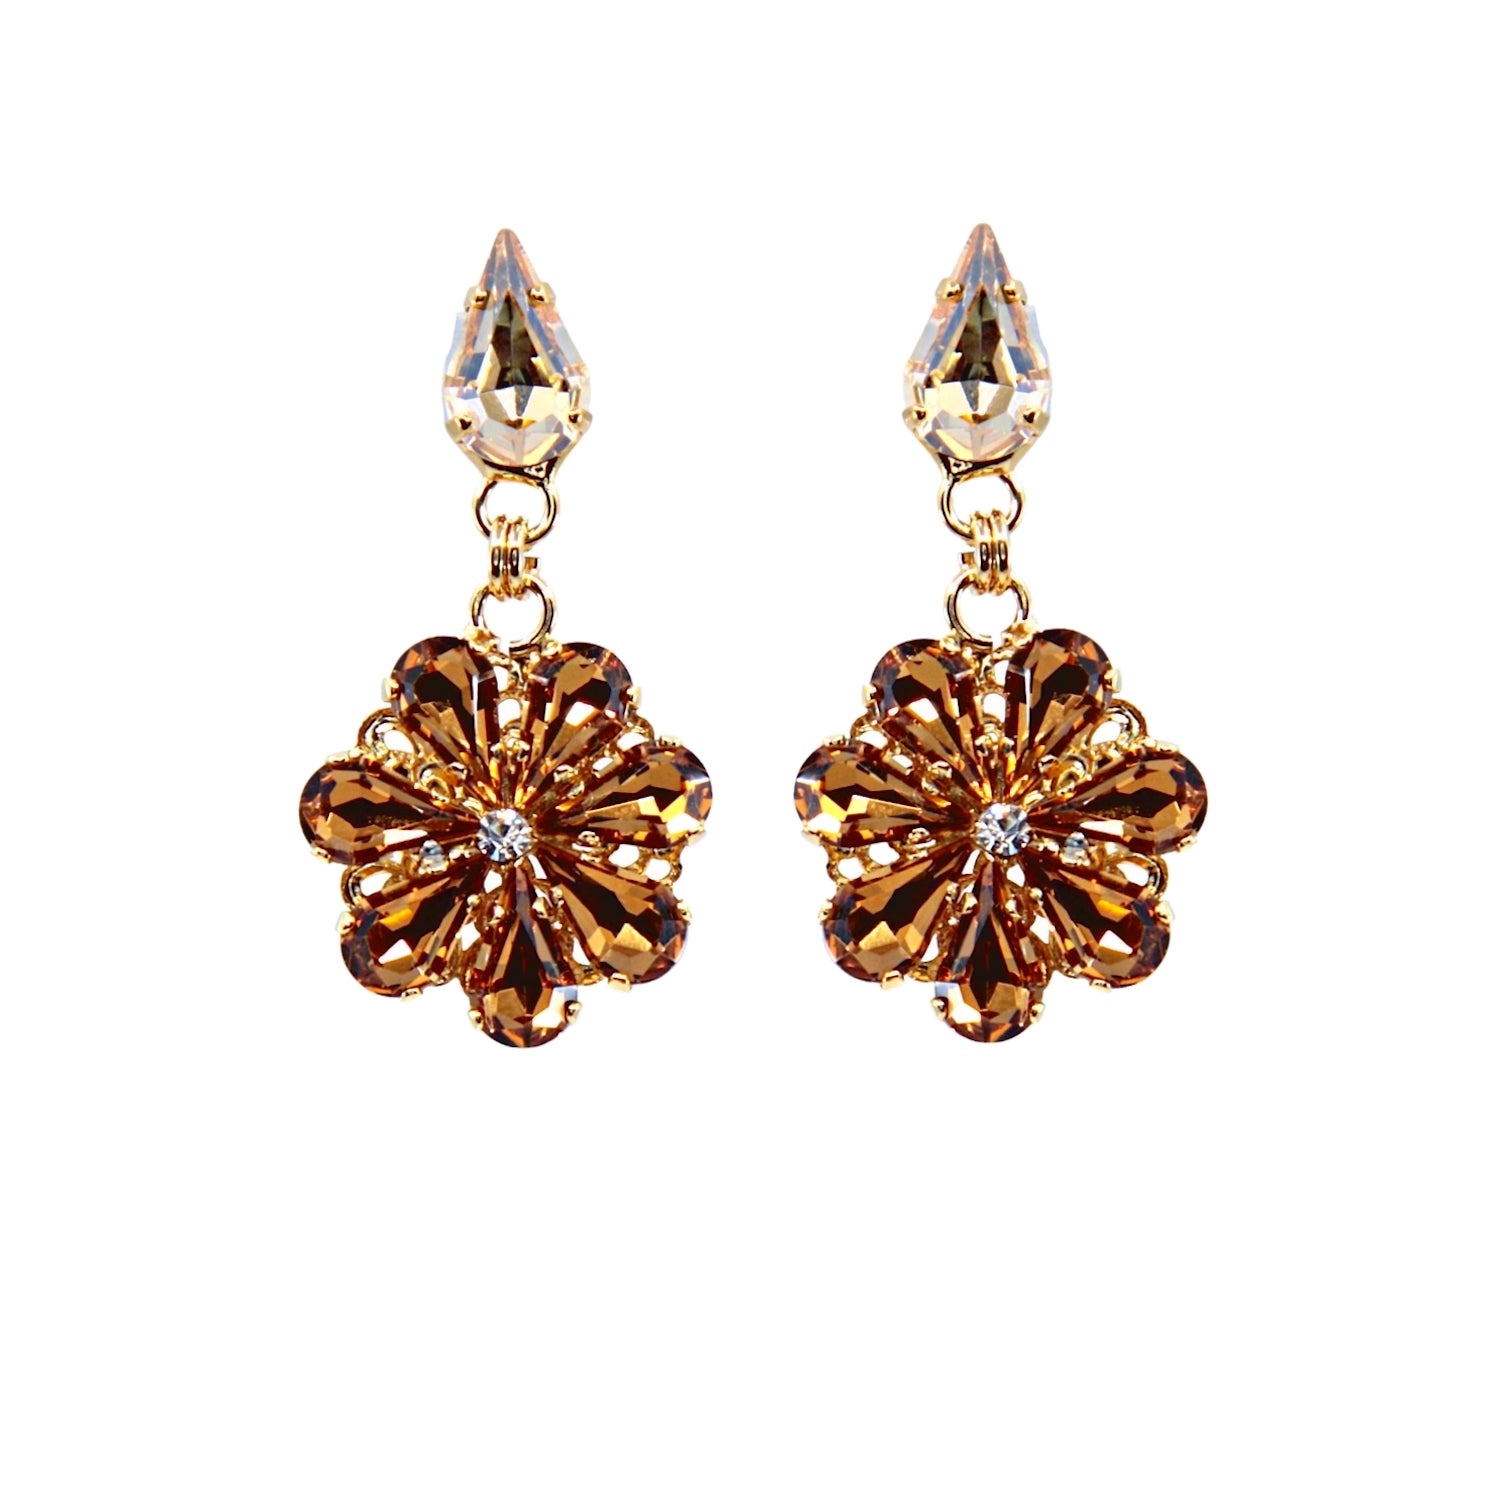 Daisy Pendant Earrings With Crystal Drops In Amber And Topaz